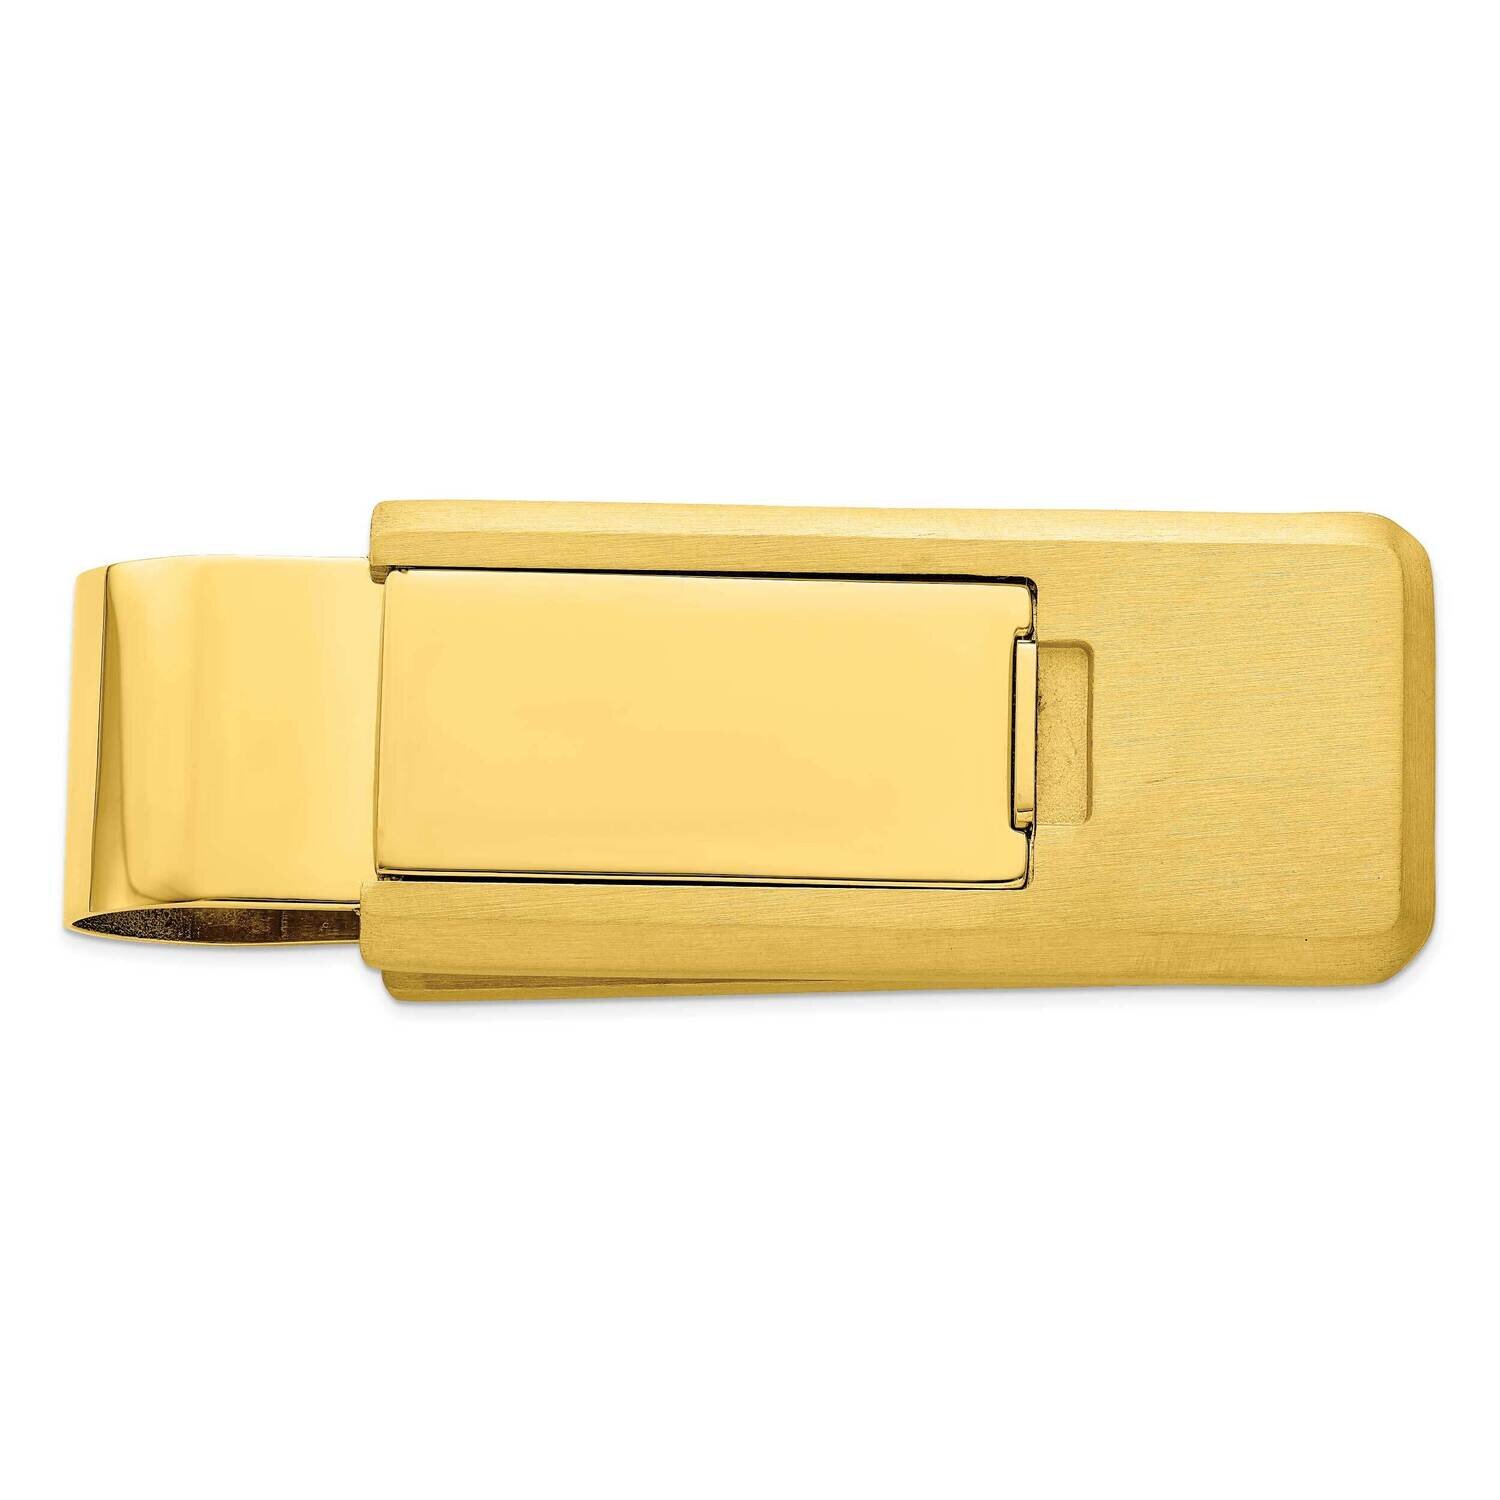 Yellow Ip-Plated Flip Money Clip Stainless Steel KW760